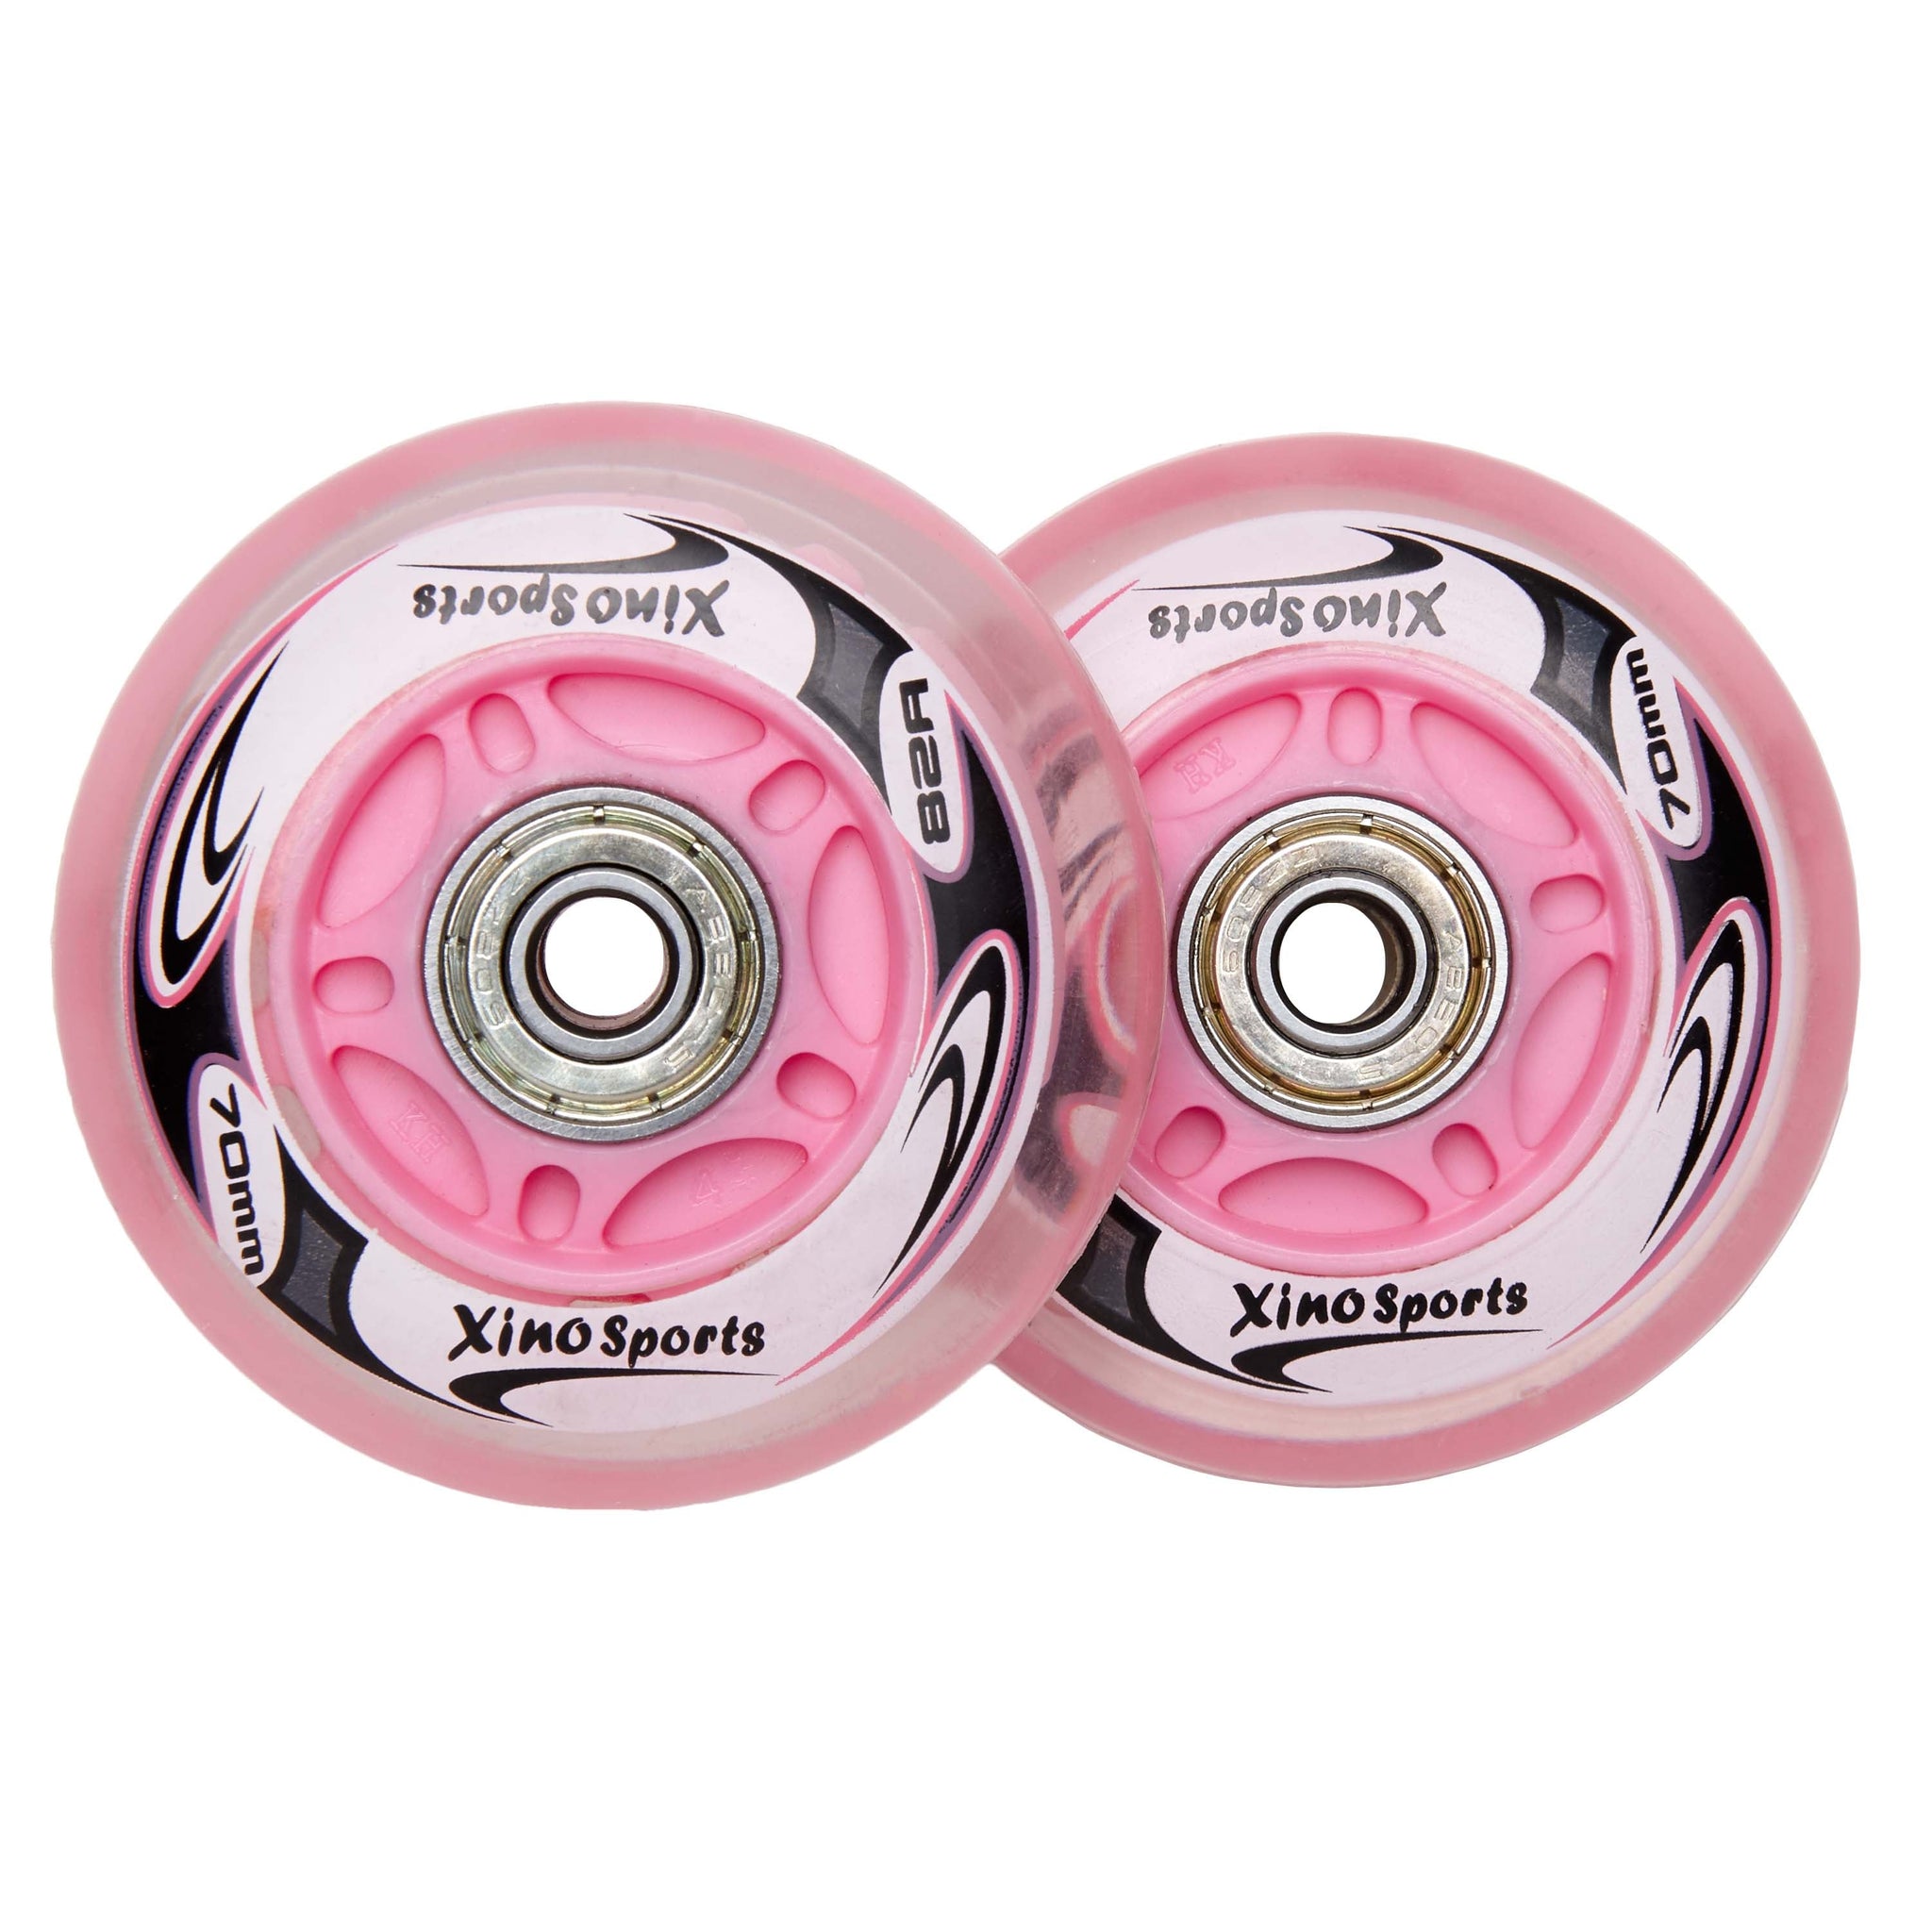 Roller blades replacement wheels - Xino Sports